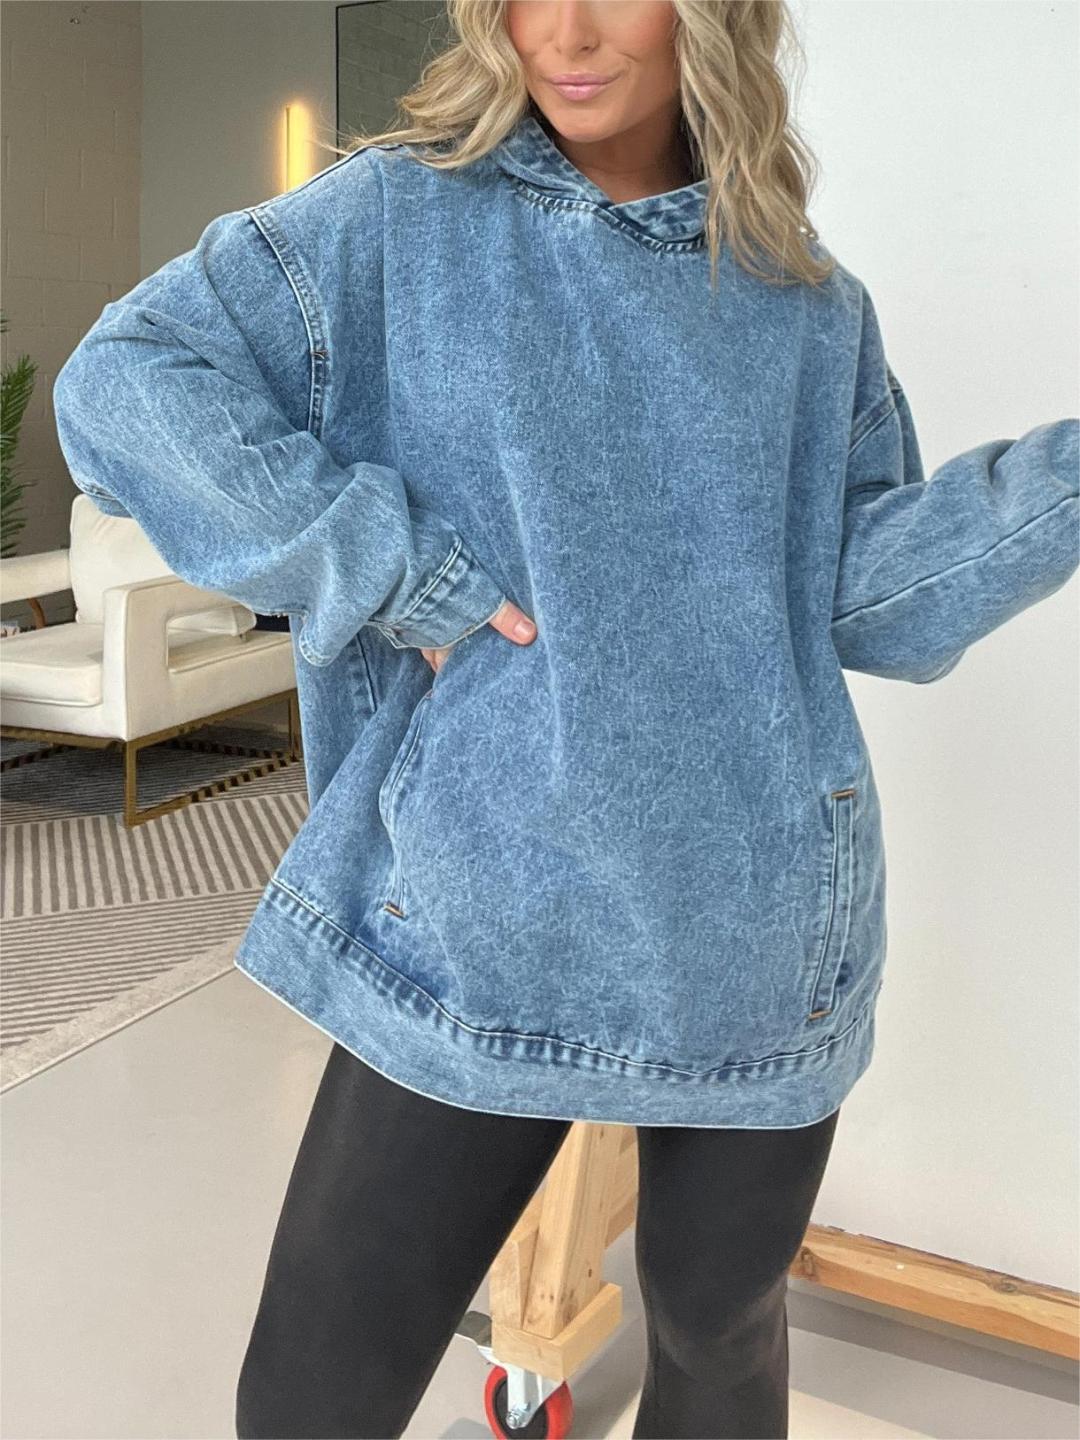 DENIM HOODED SWEATSHIRT WITH FRONT POCKETS (BUY 2 10% OFF)